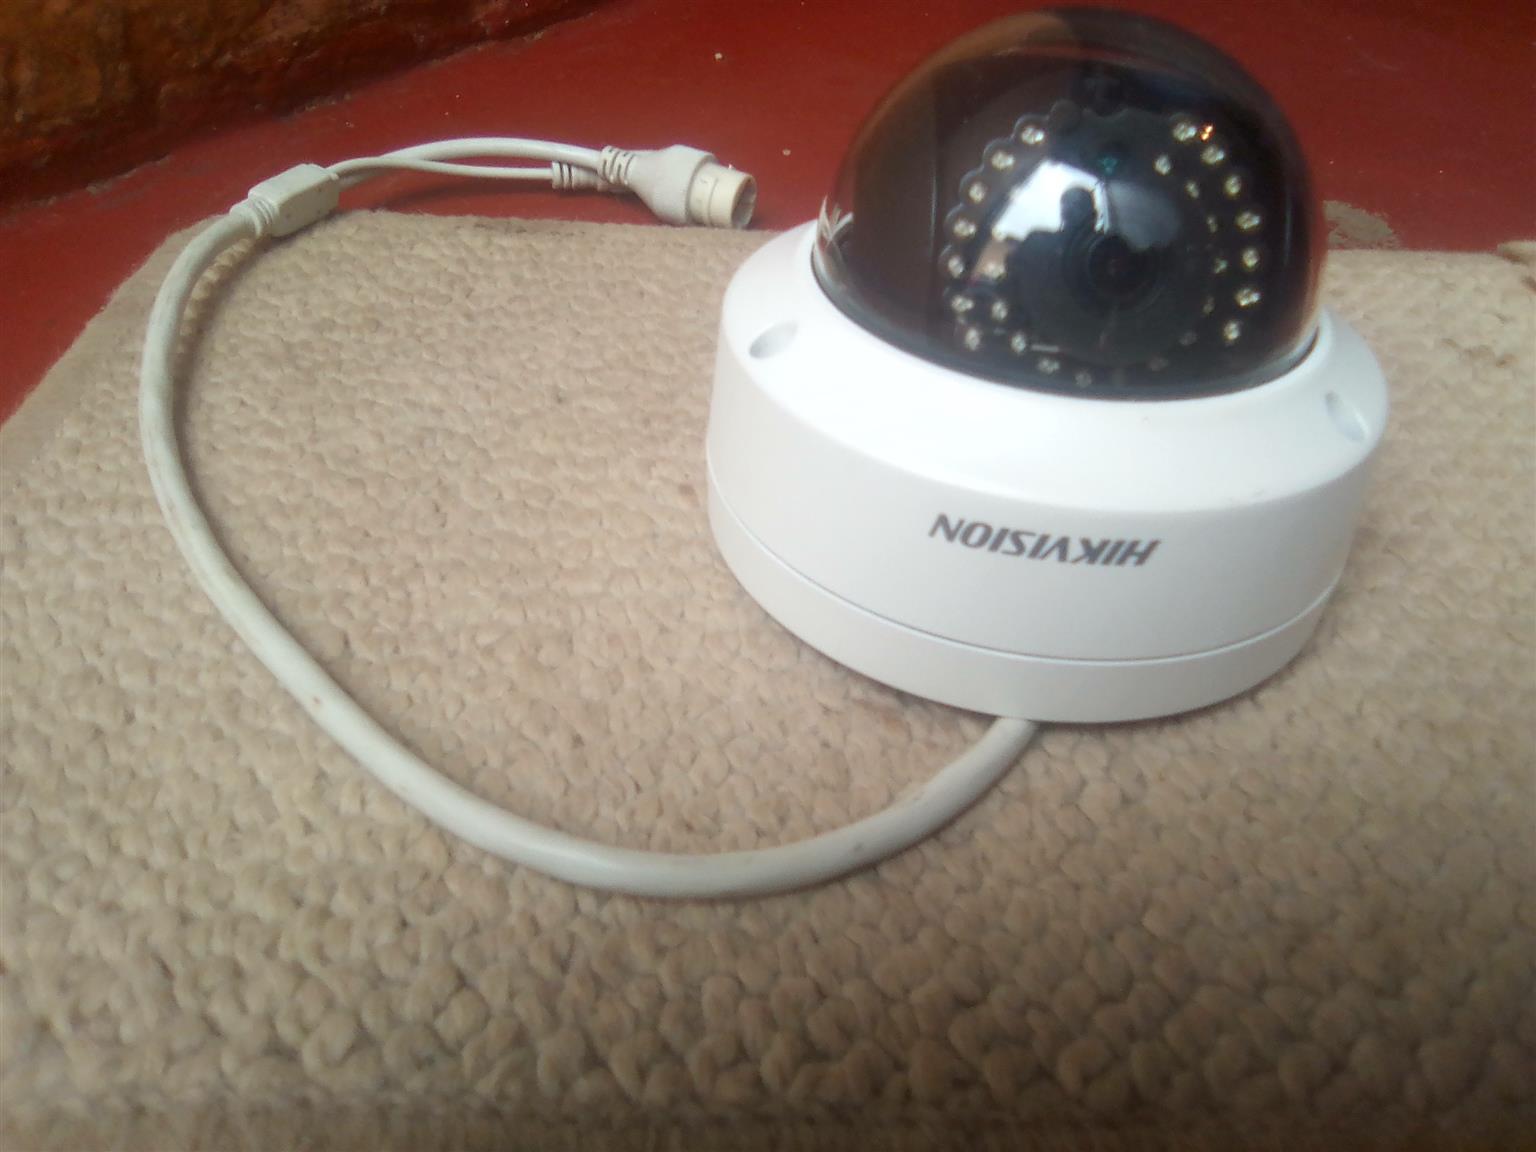 I'm selling second hand Hikvision cameras 